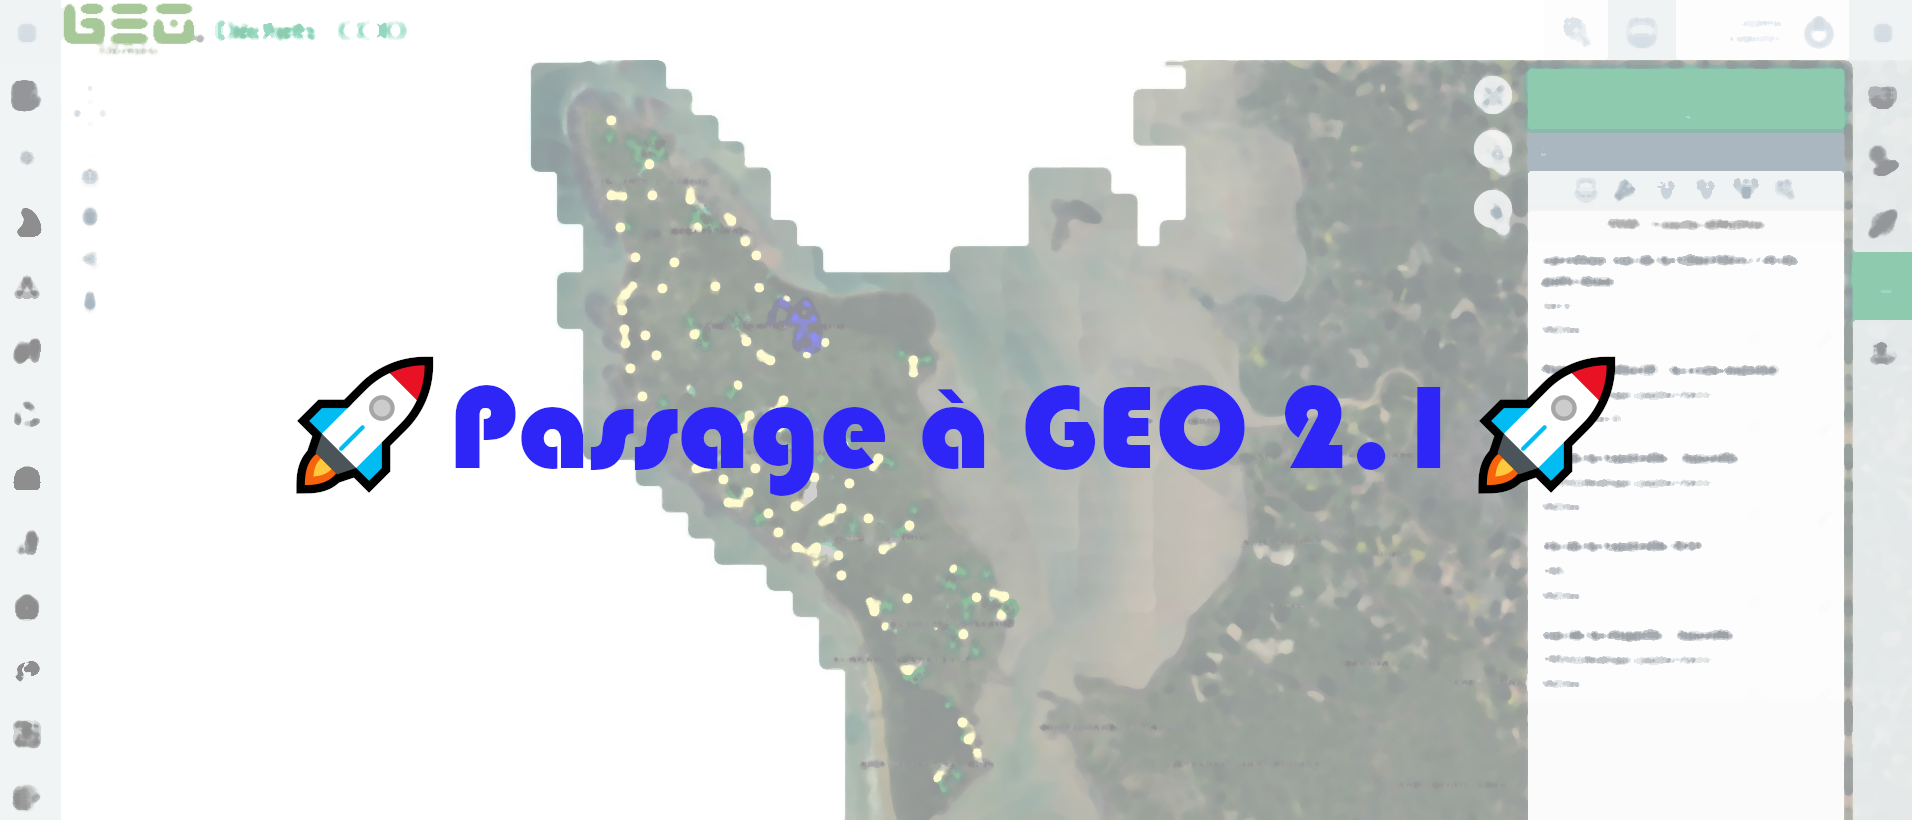 Featured image for “🚀Passage à GEO 2.1 🚀”